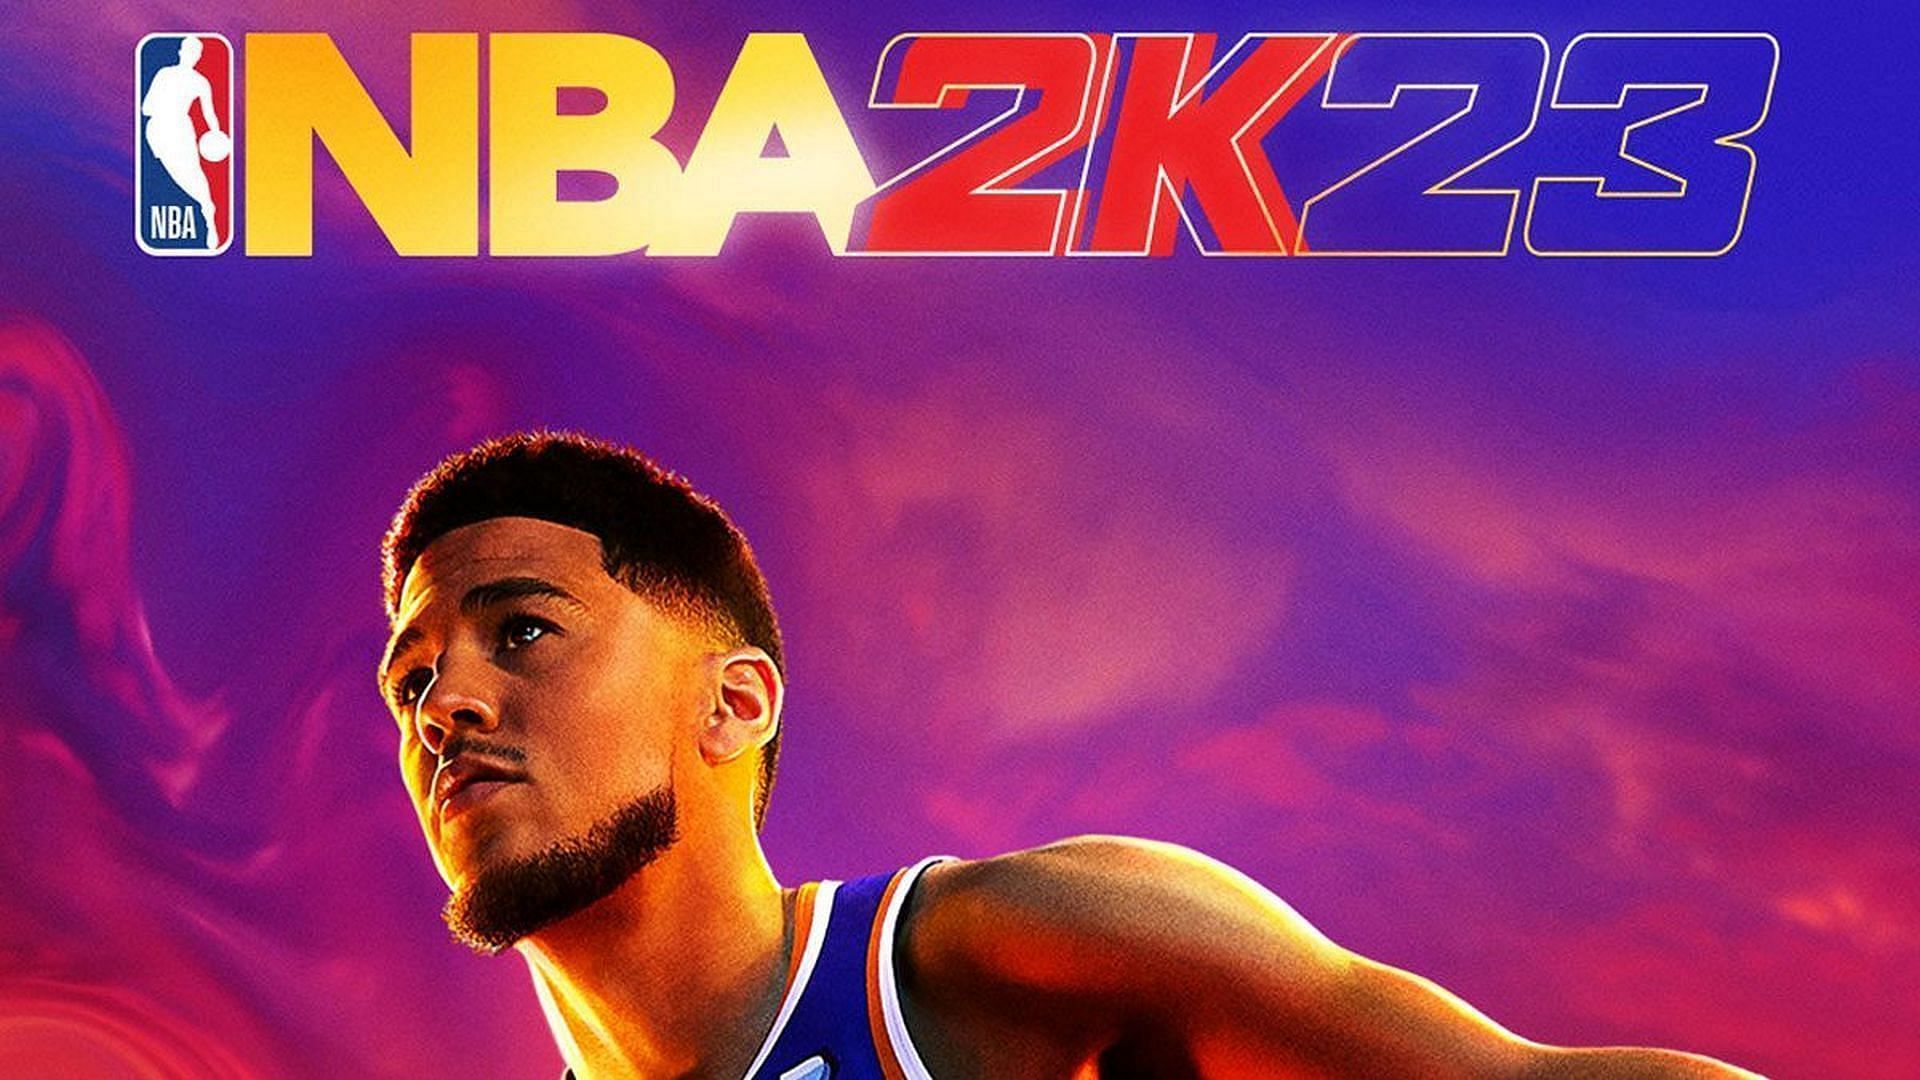 NBA 2K23 was released on September 9th.